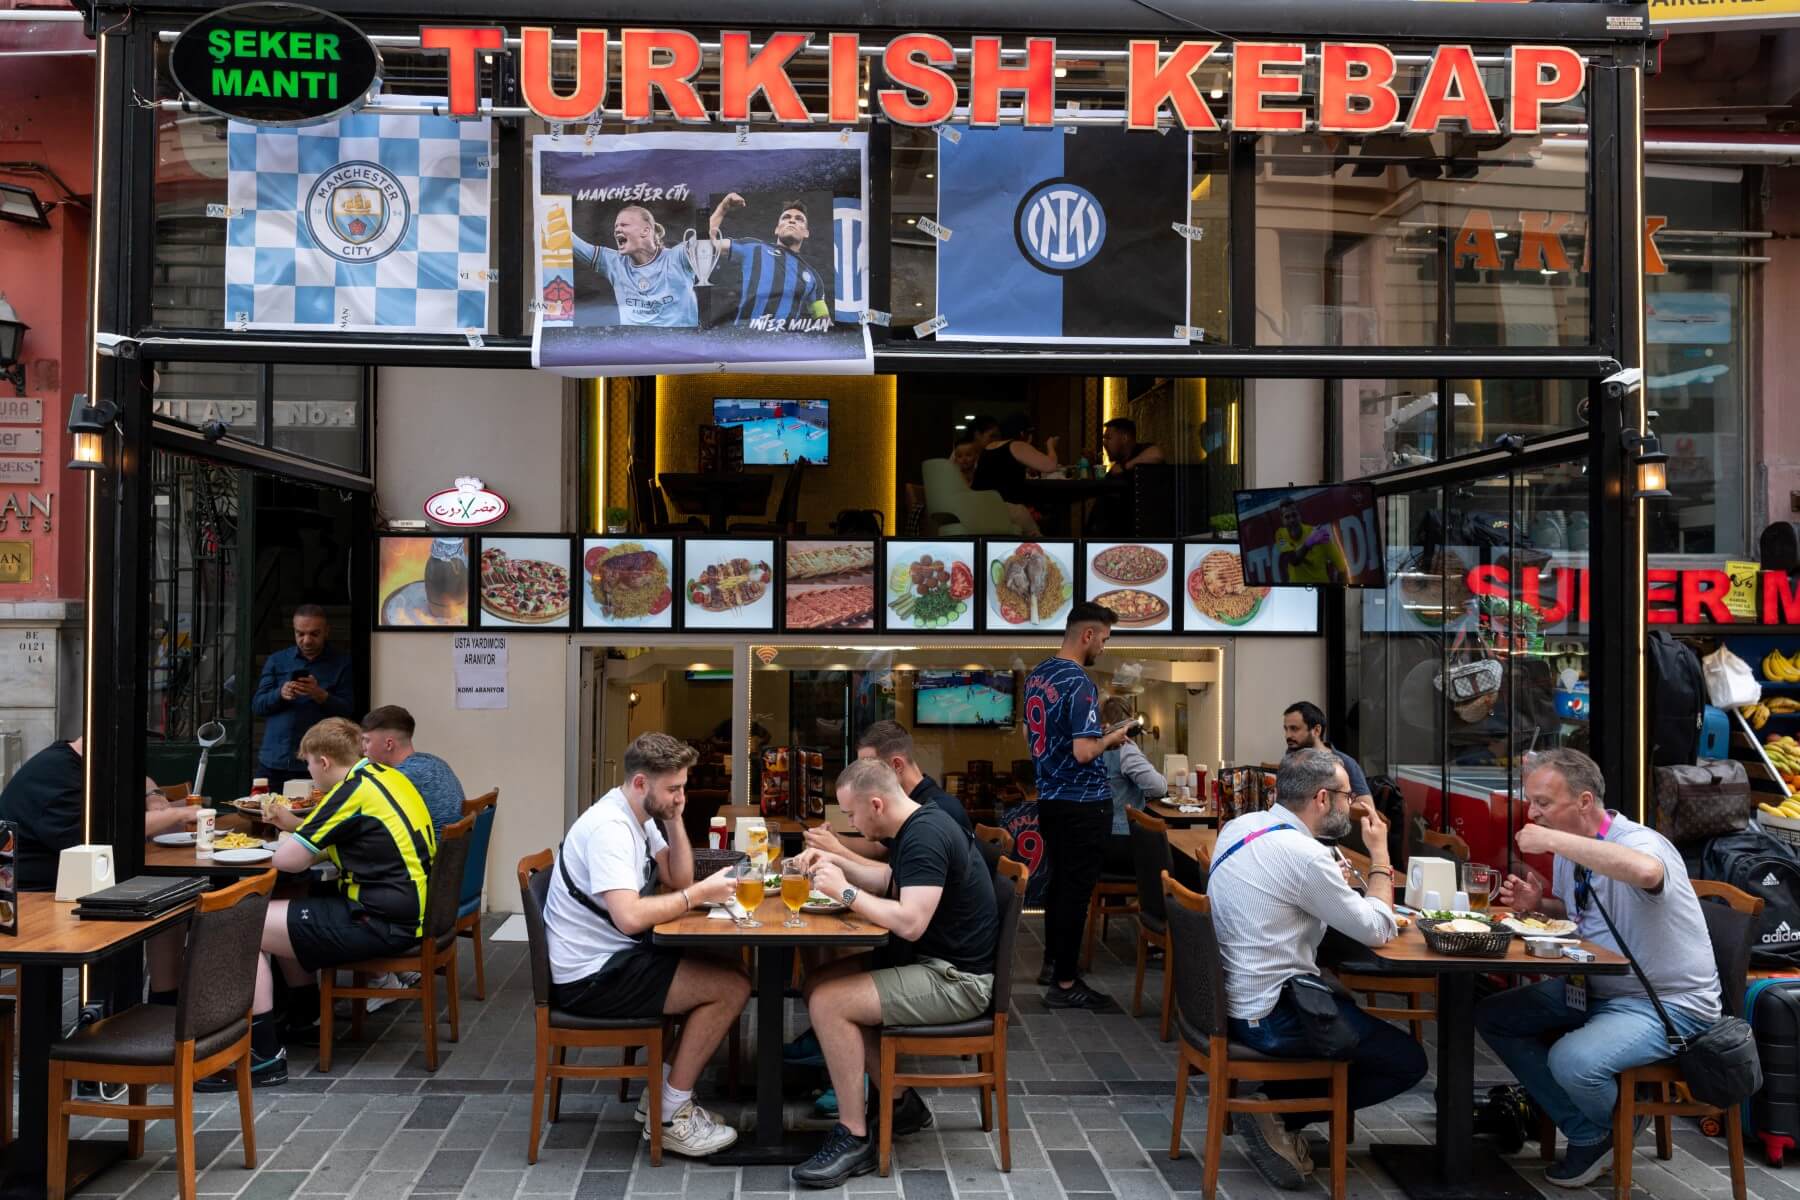 Turks uneasy with high prices launch boycott of cafes, restaurants